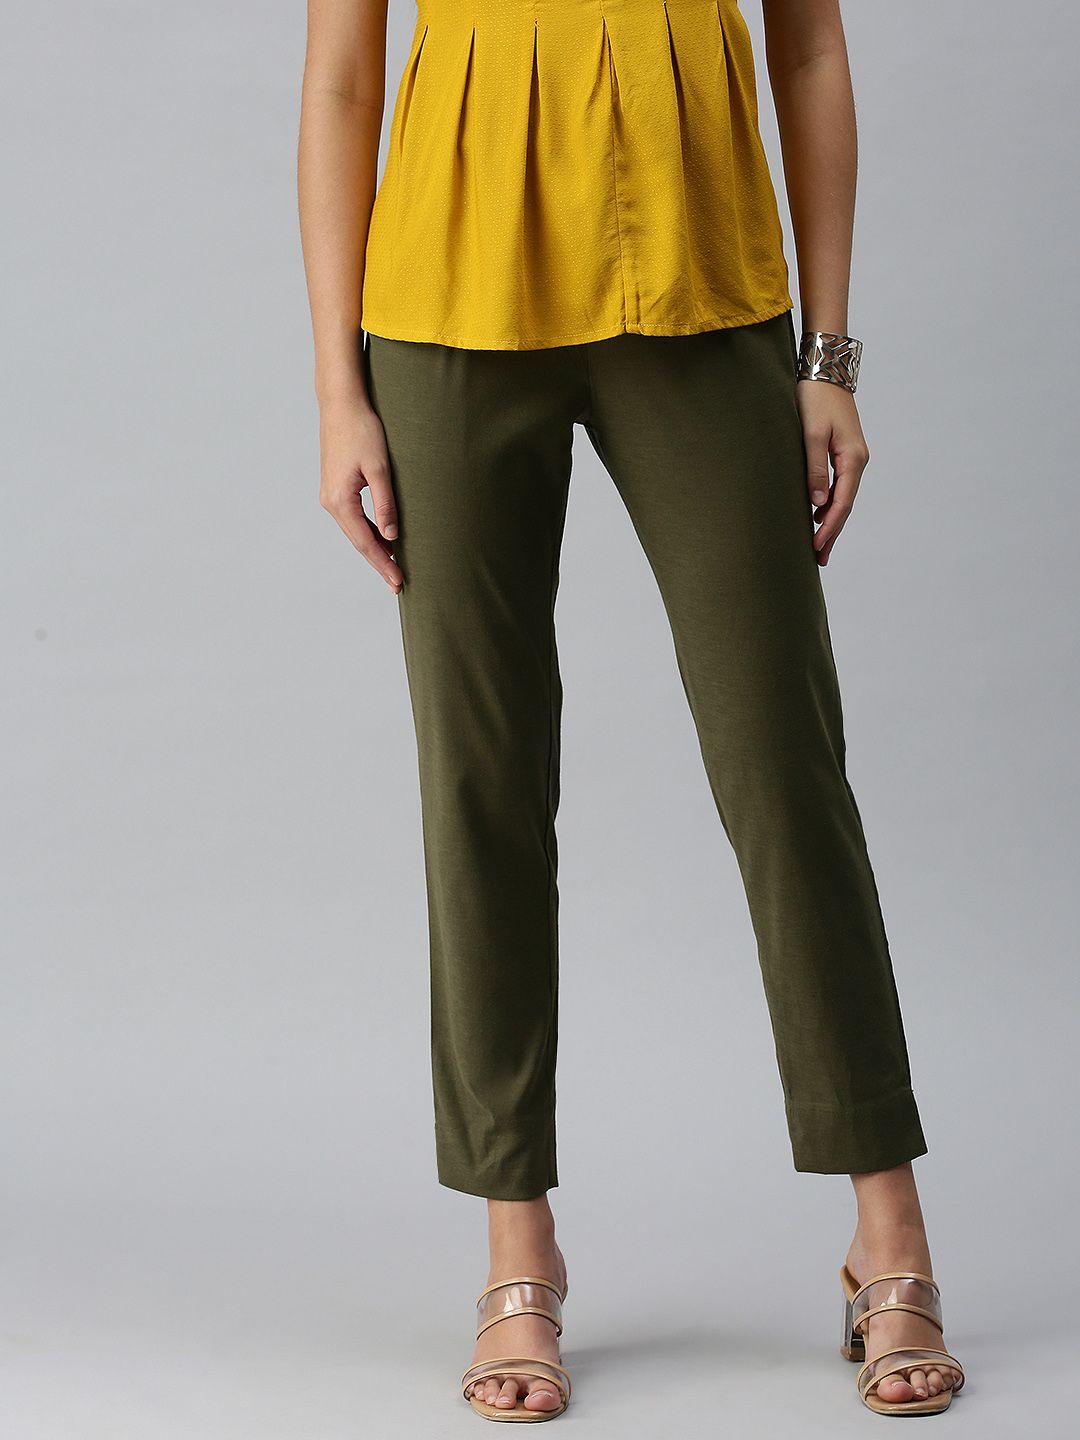 etiquette women olive green solid smart casual trousers